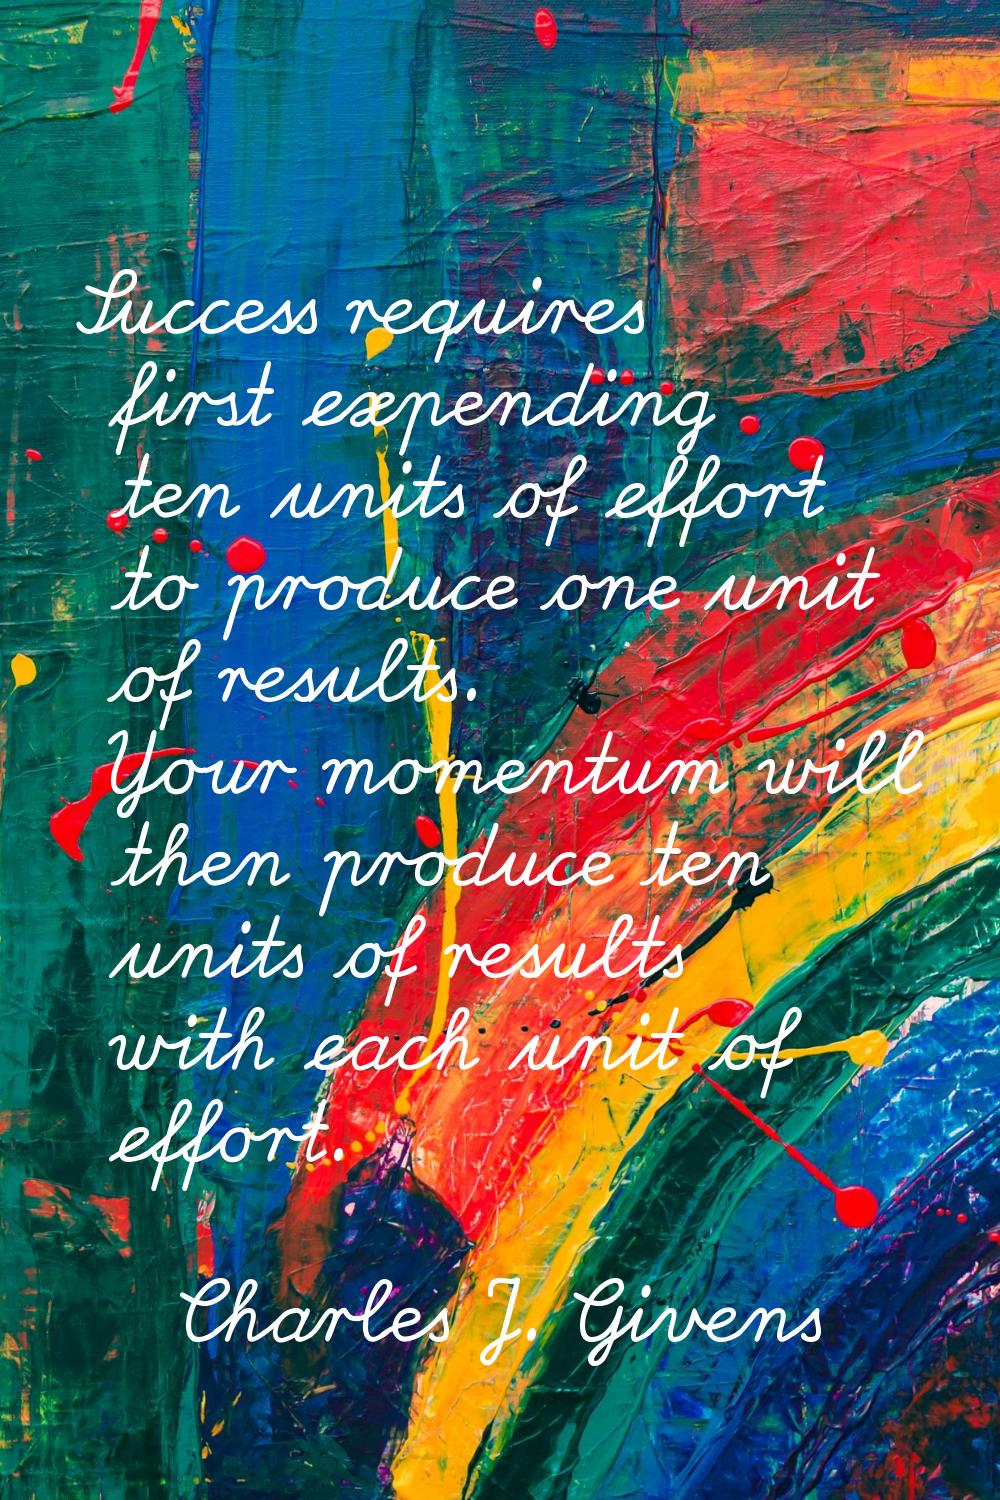 Success requires first expending ten units of effort to produce one unit of results. Your momentum 